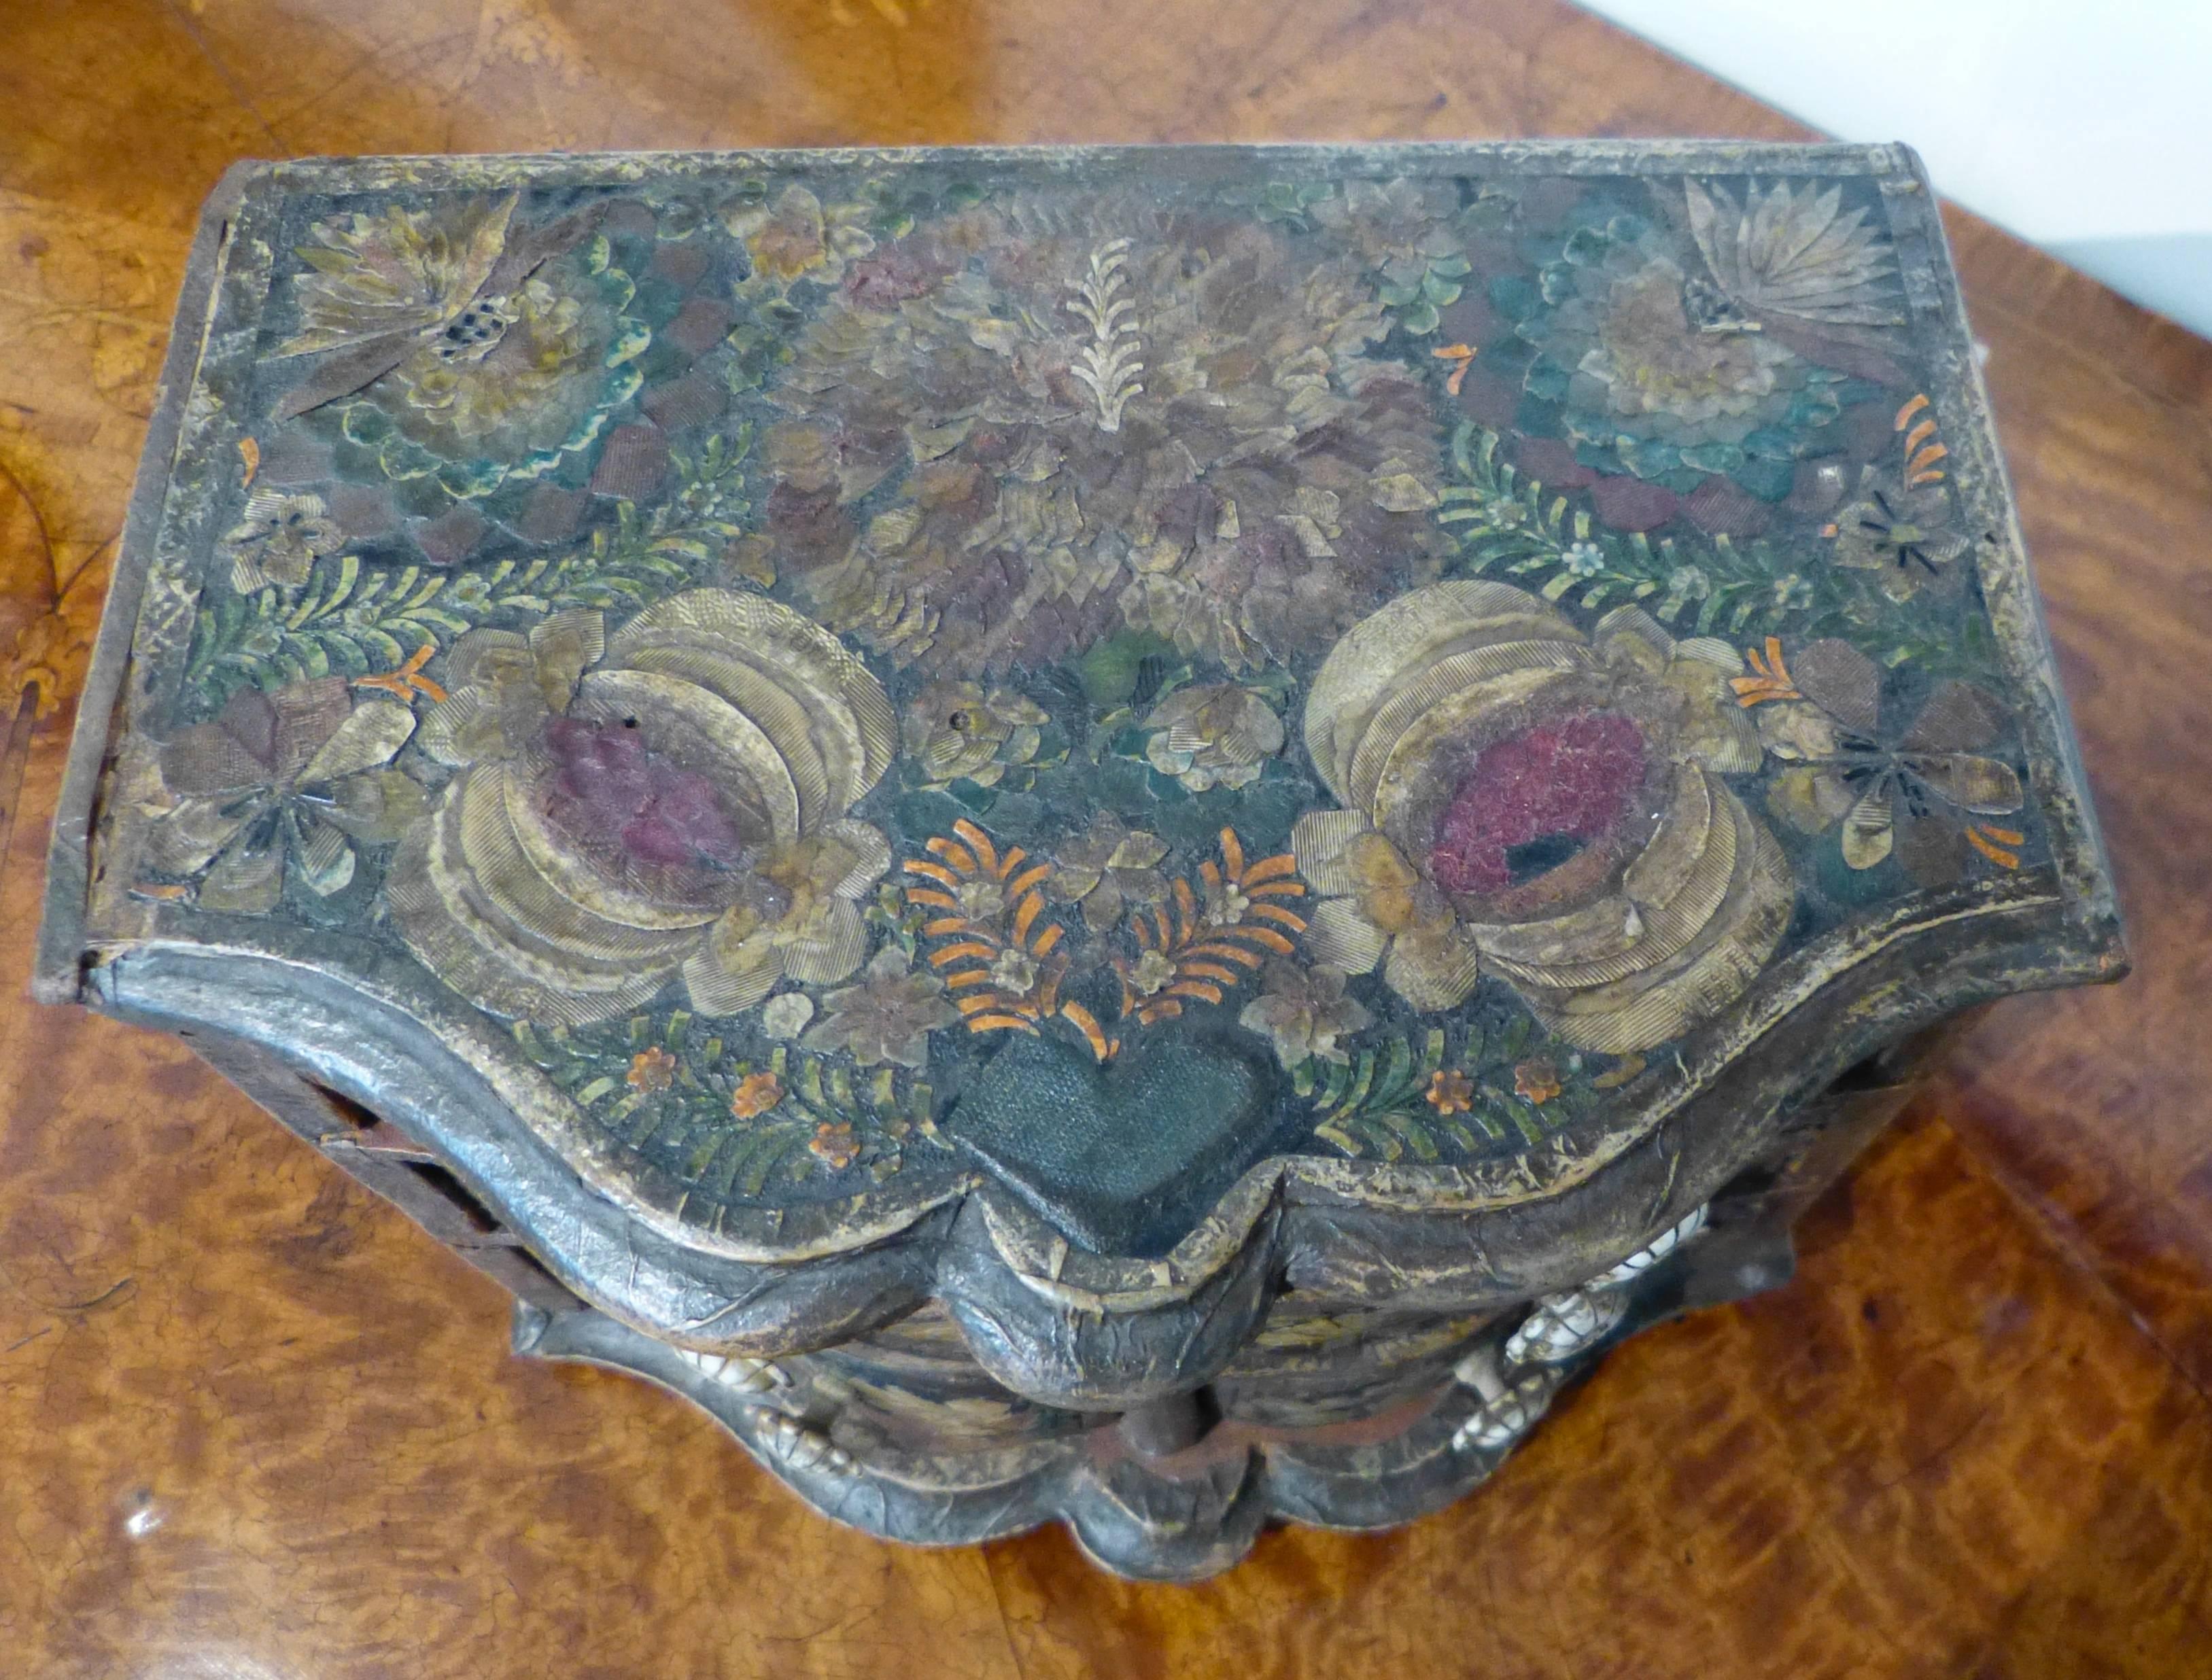 A rare and unusual German rococo serpentine front laca povera (decoupage) miniature chest having floral appliques to the front, pomegranate and hearts to the top. The pomegranate signifying abundance or fertility, the hearts as love. Probably a